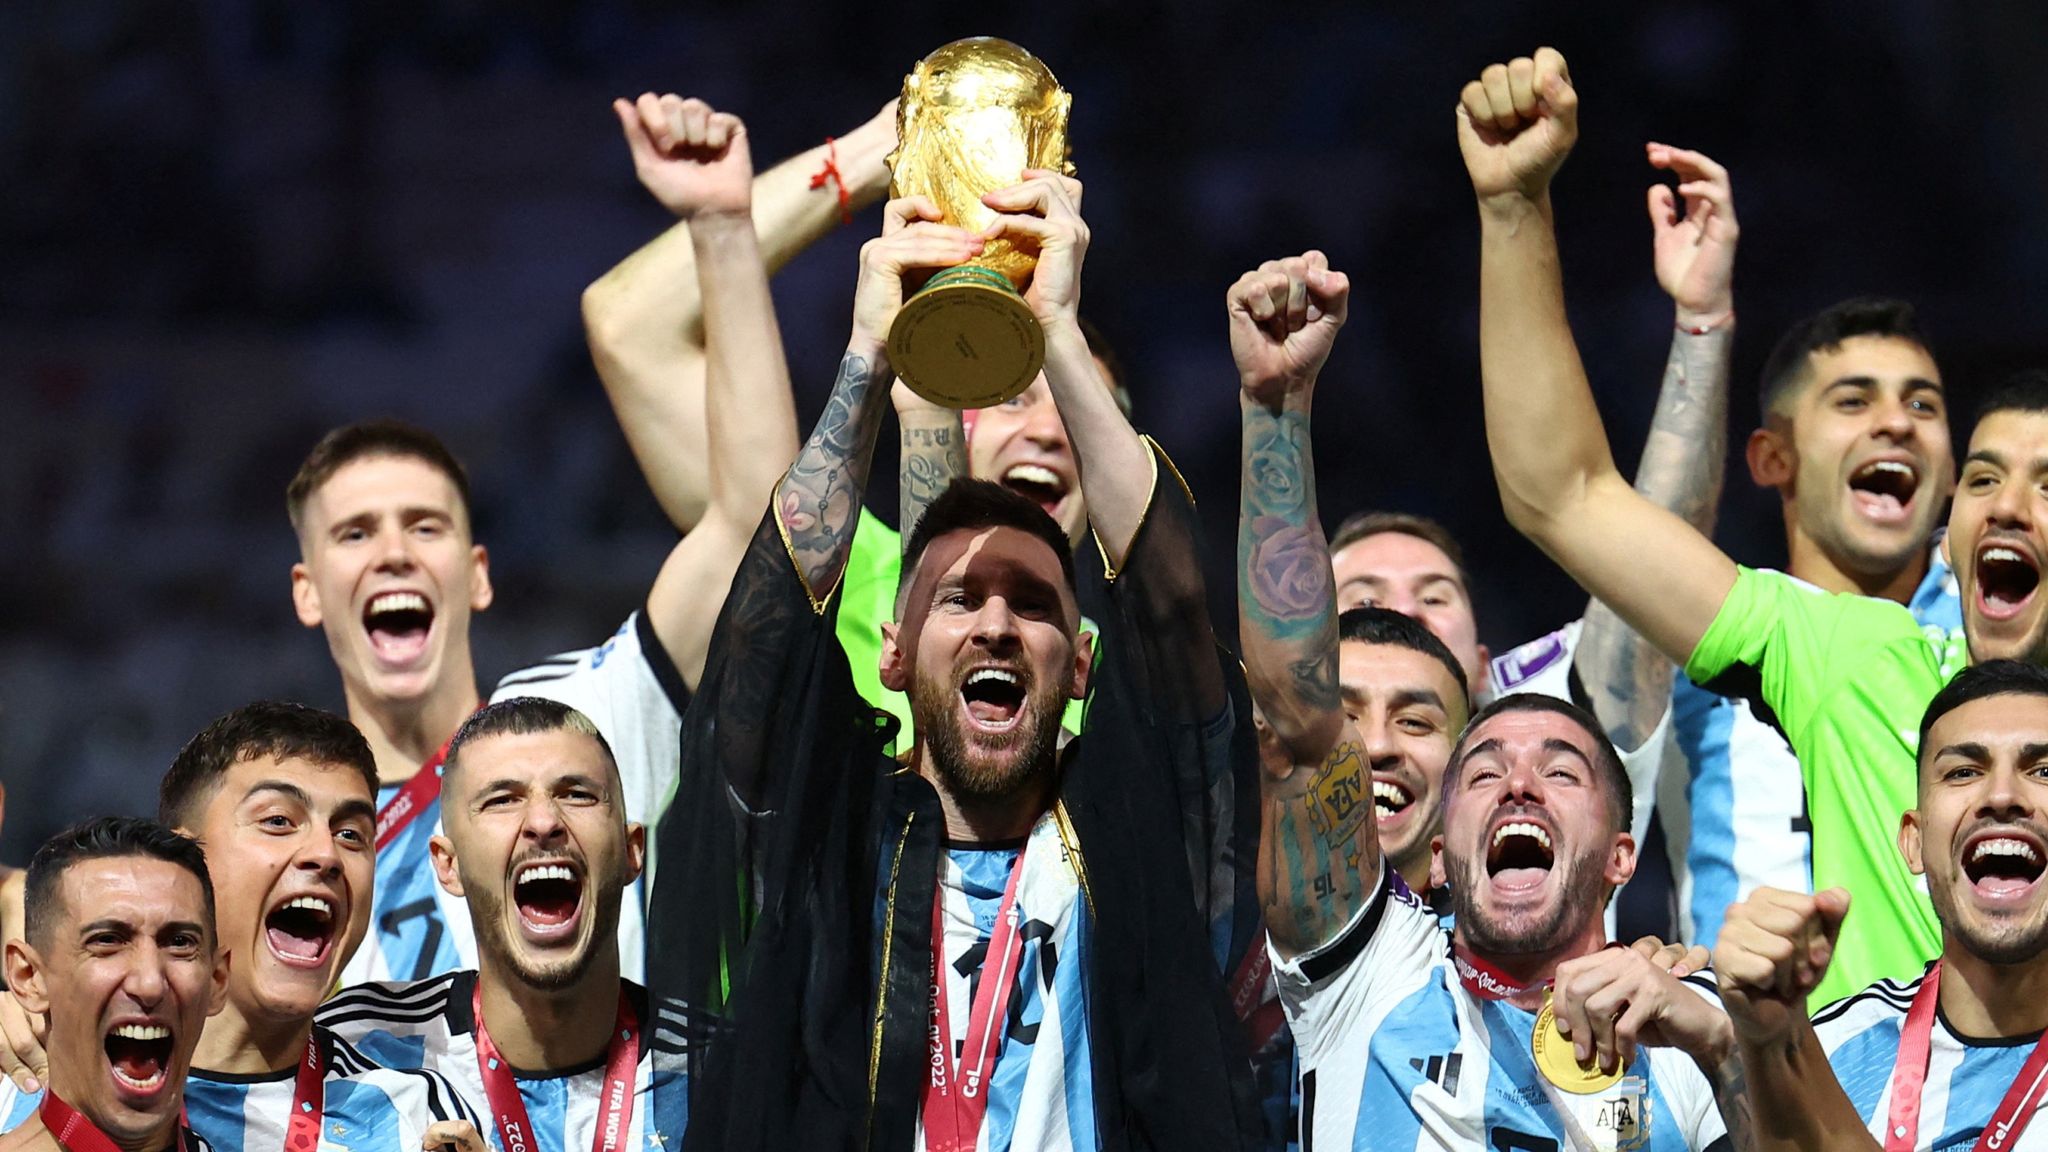 FIFA: 2026 World Cup to have 4-team groups, 48 teams, 104 games